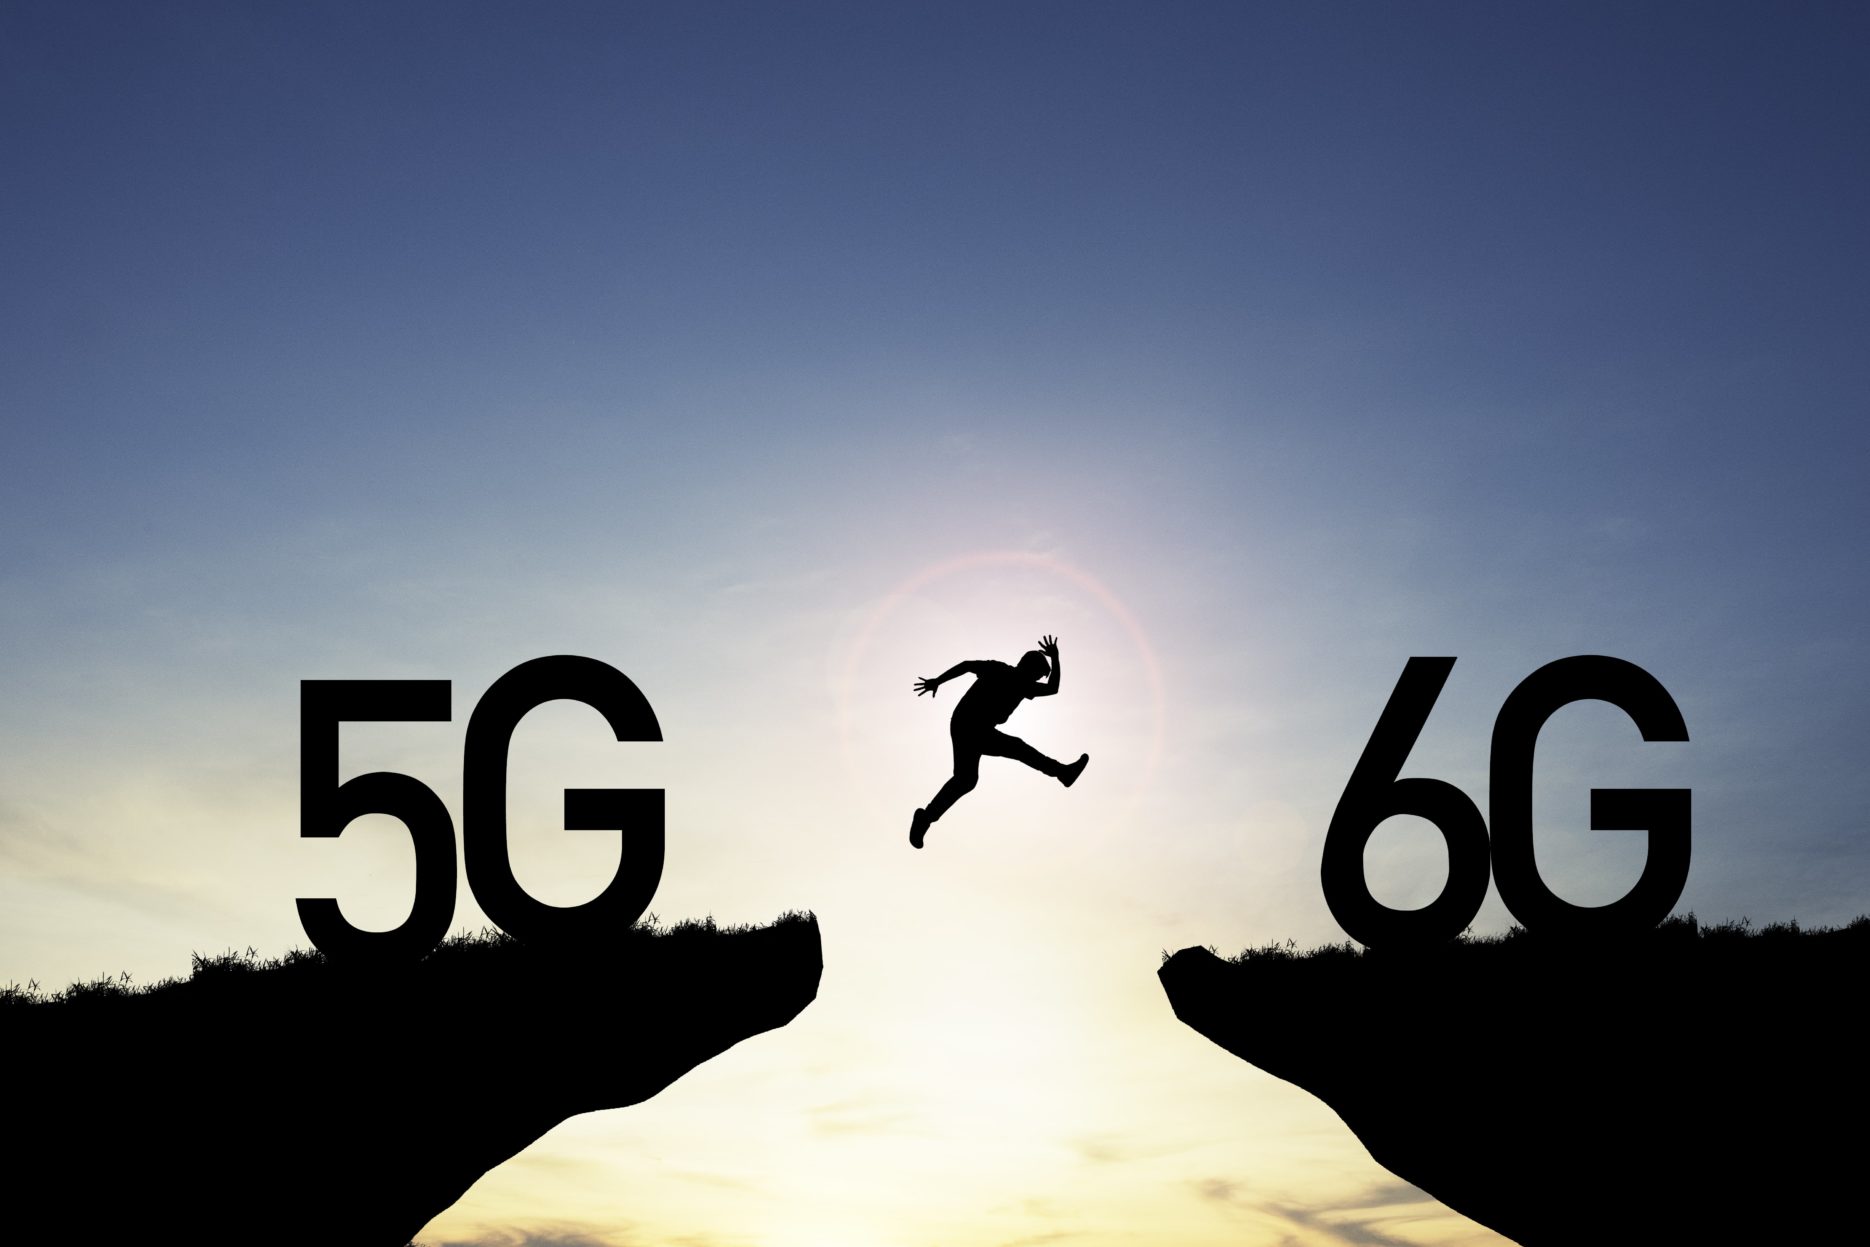 China leaps from 5G to 6G. Credit: Adobe Stock